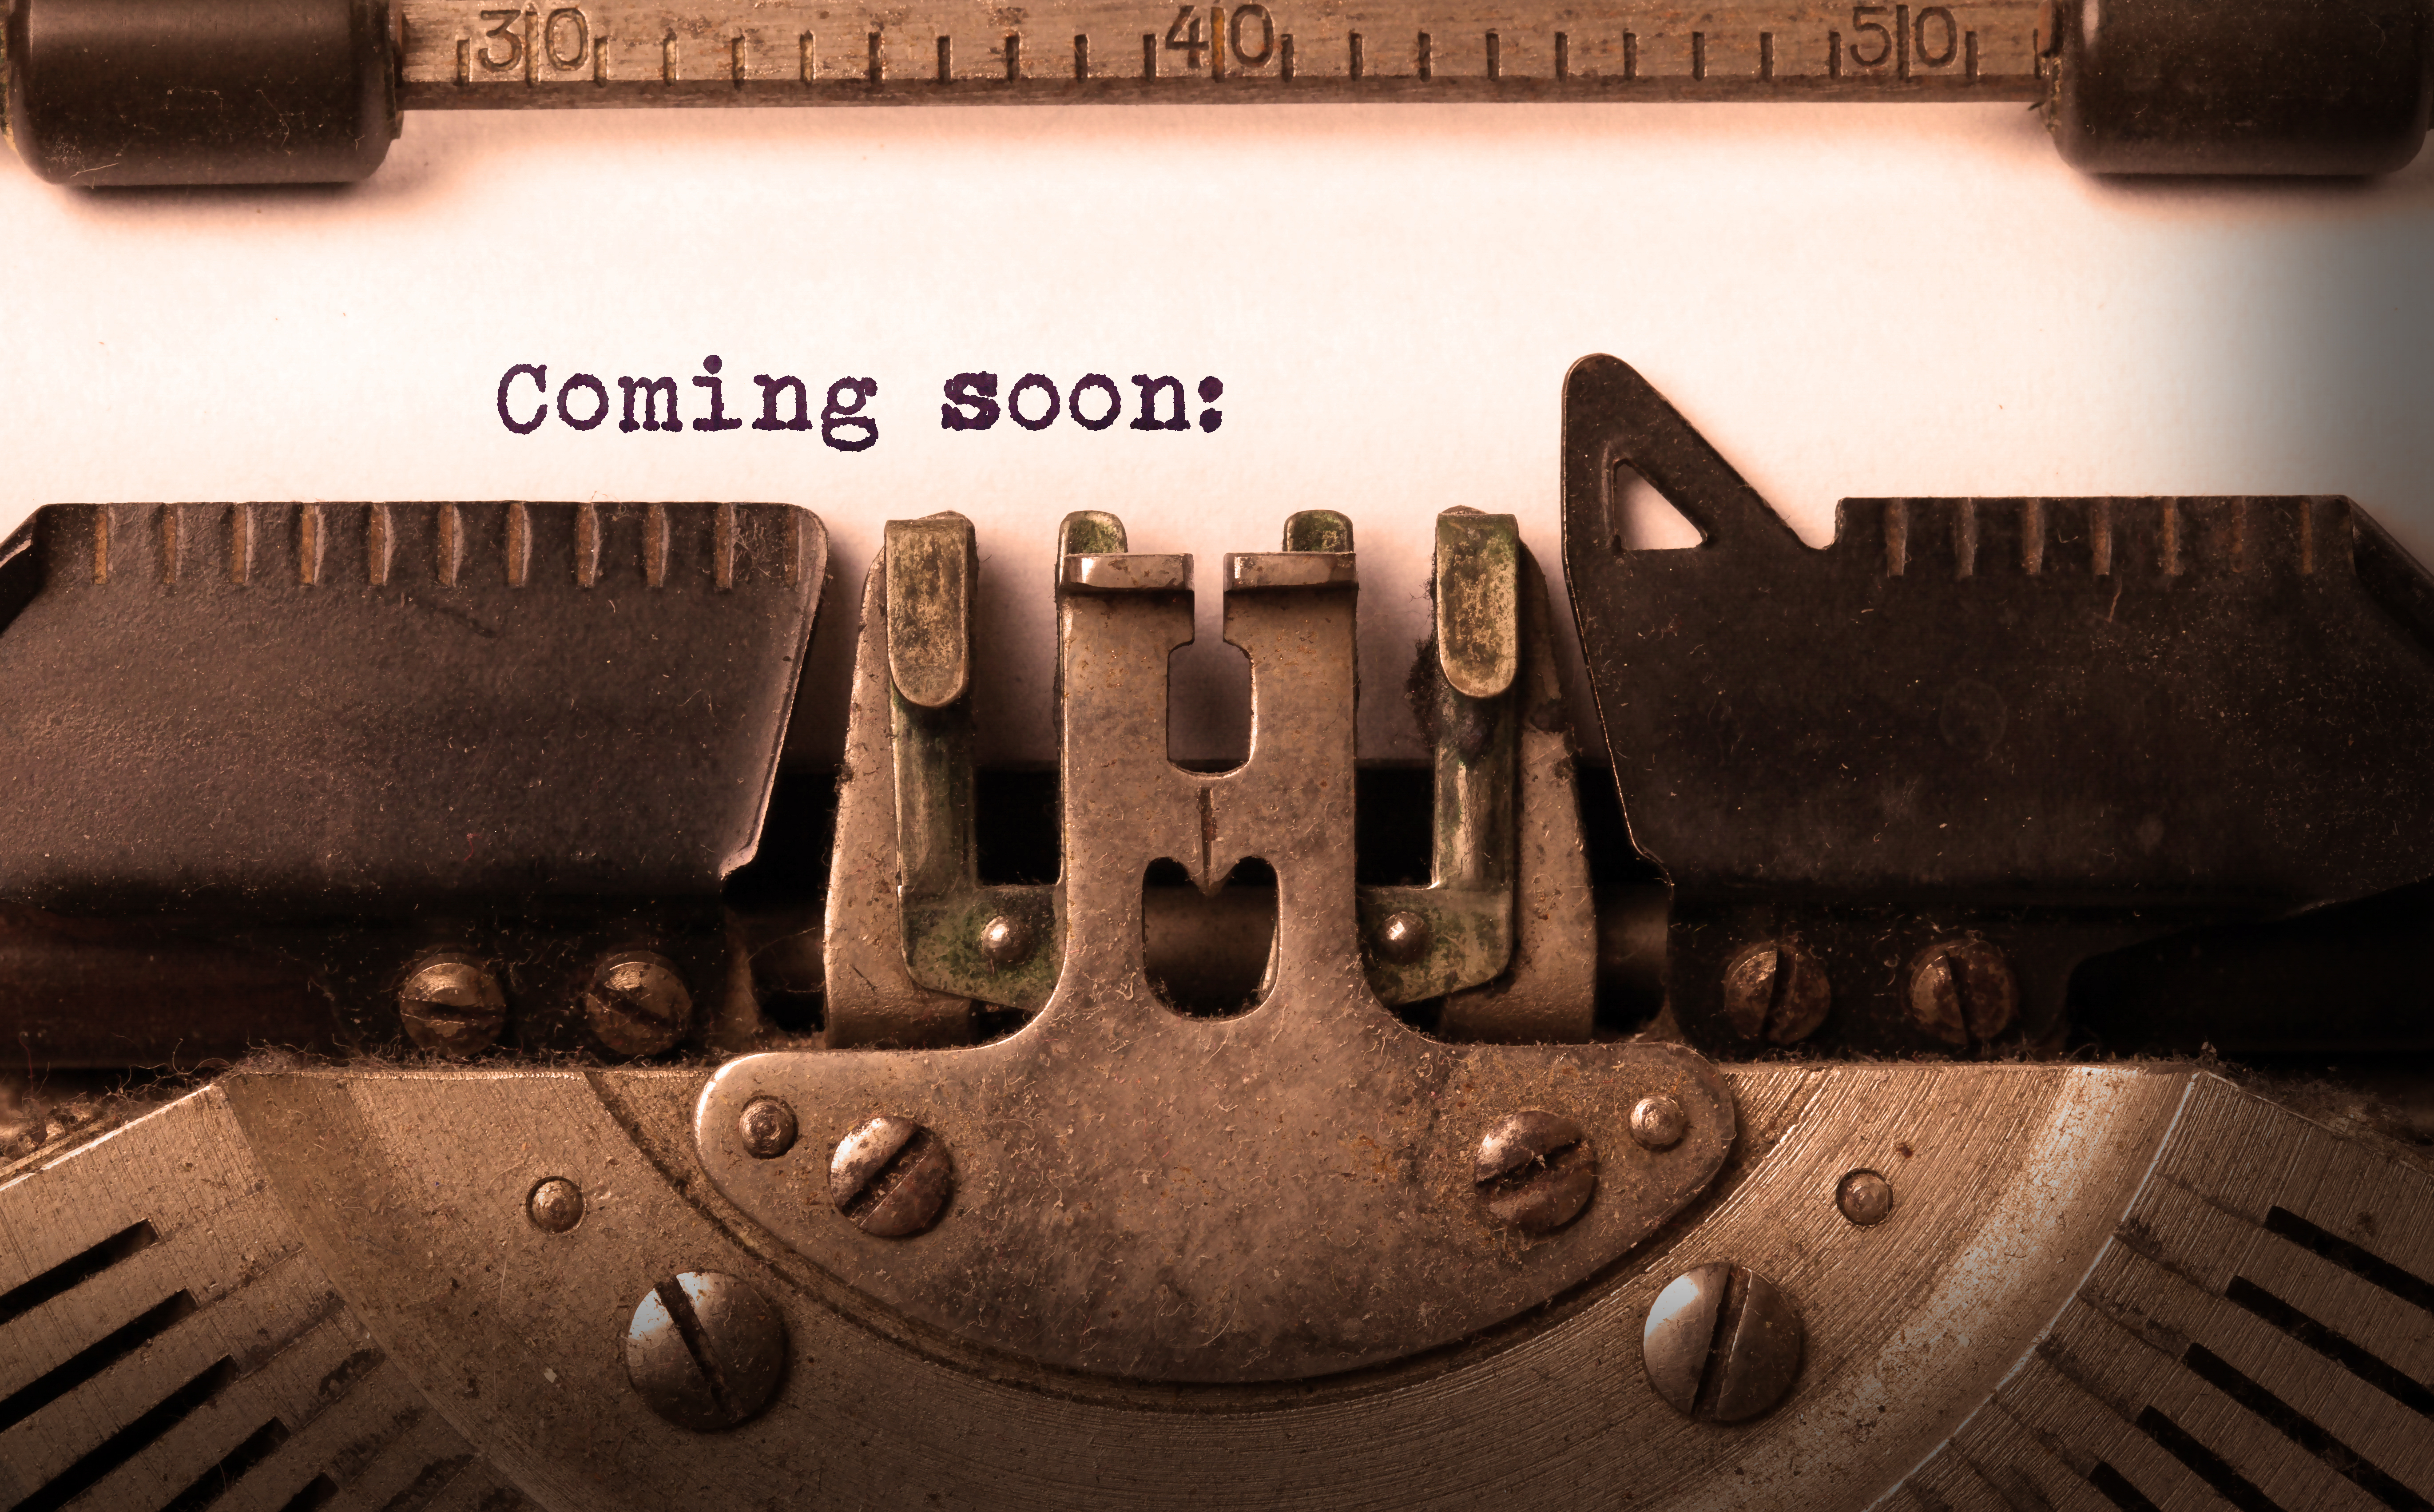 A typewriter writing out coming soon!